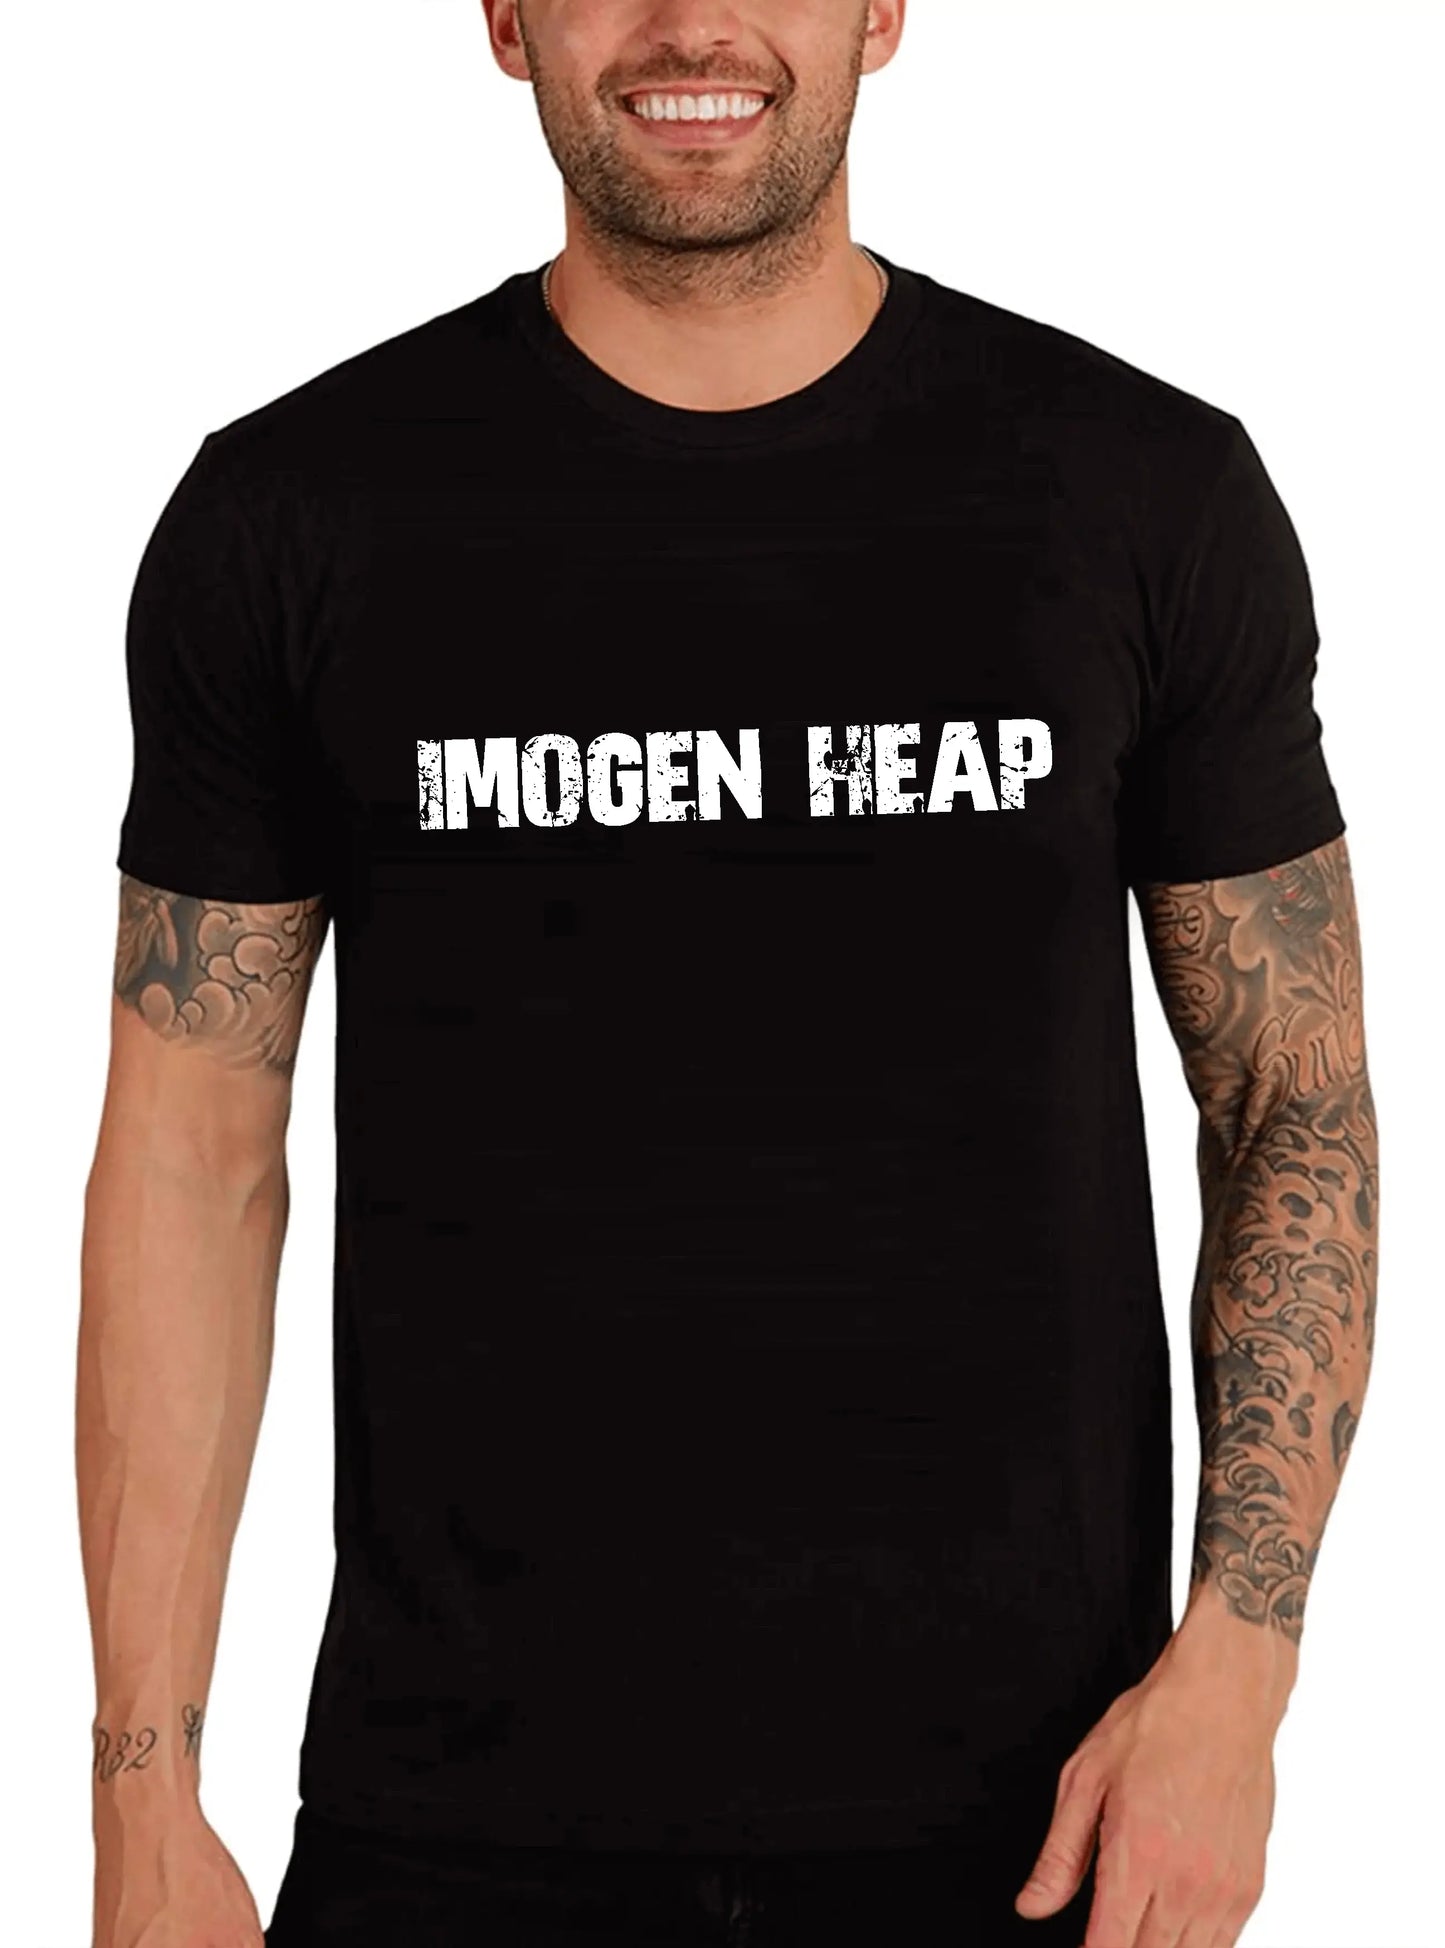 Men's Graphic T-Shirt Imogen Heap Eco-Friendly Limited Edition Short Sleeve Tee-Shirt Vintage Birthday Gift Novelty